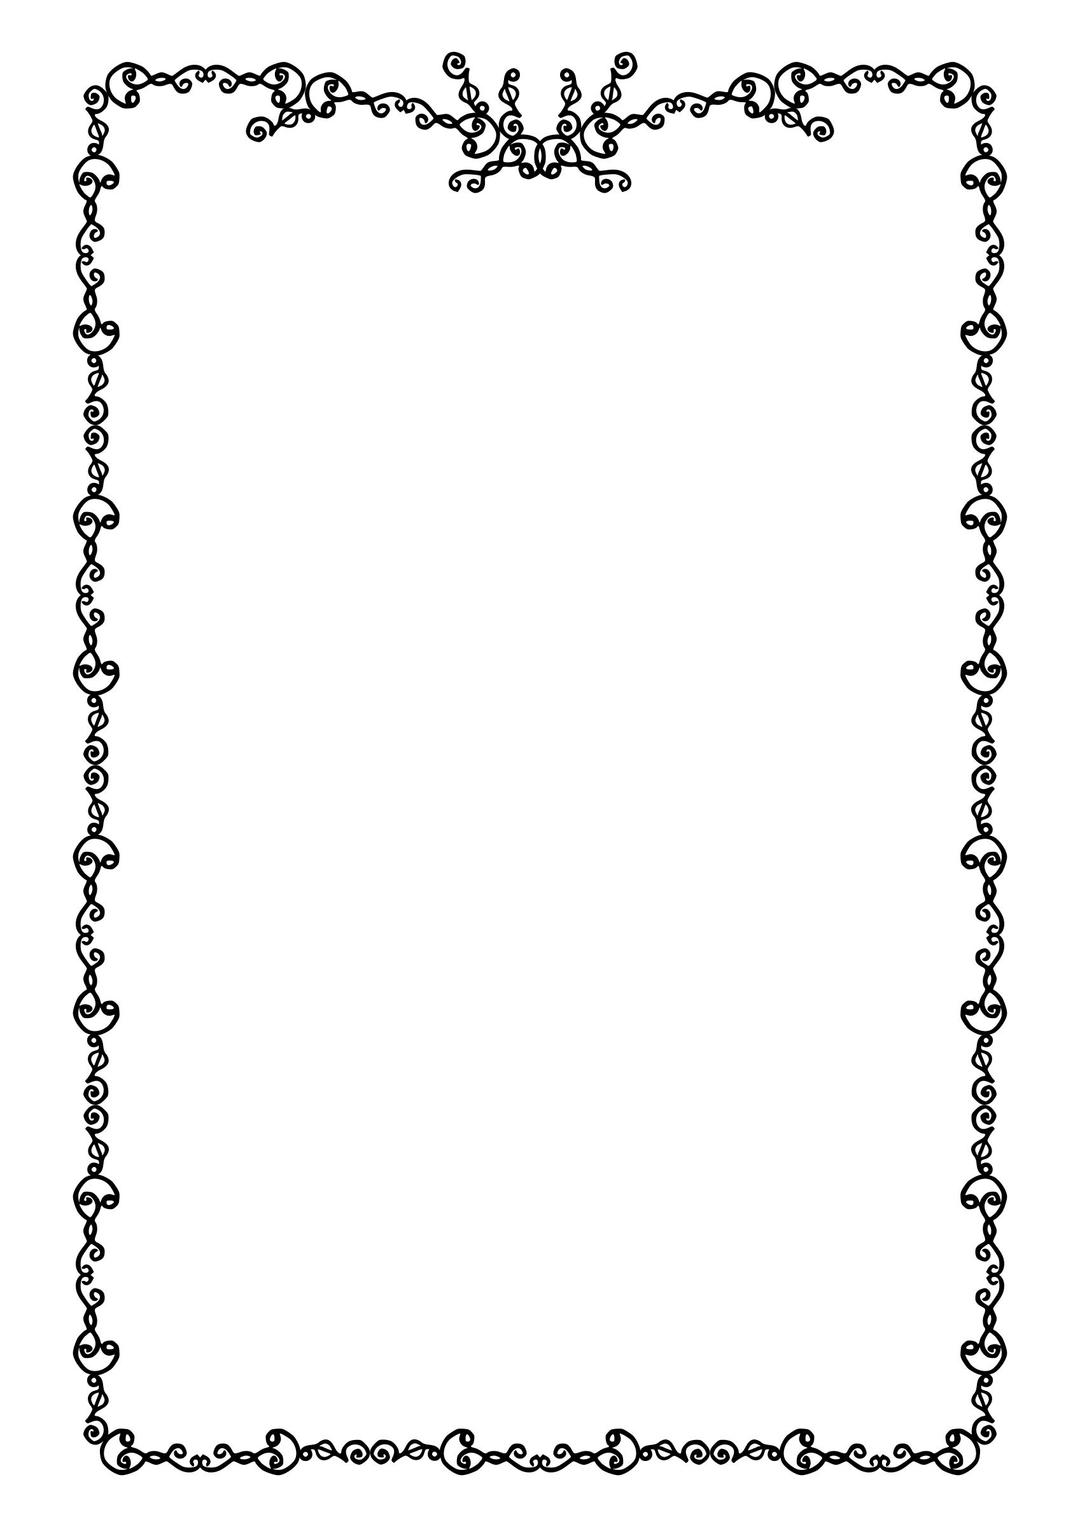 Frame Made of Squiggles png transparent